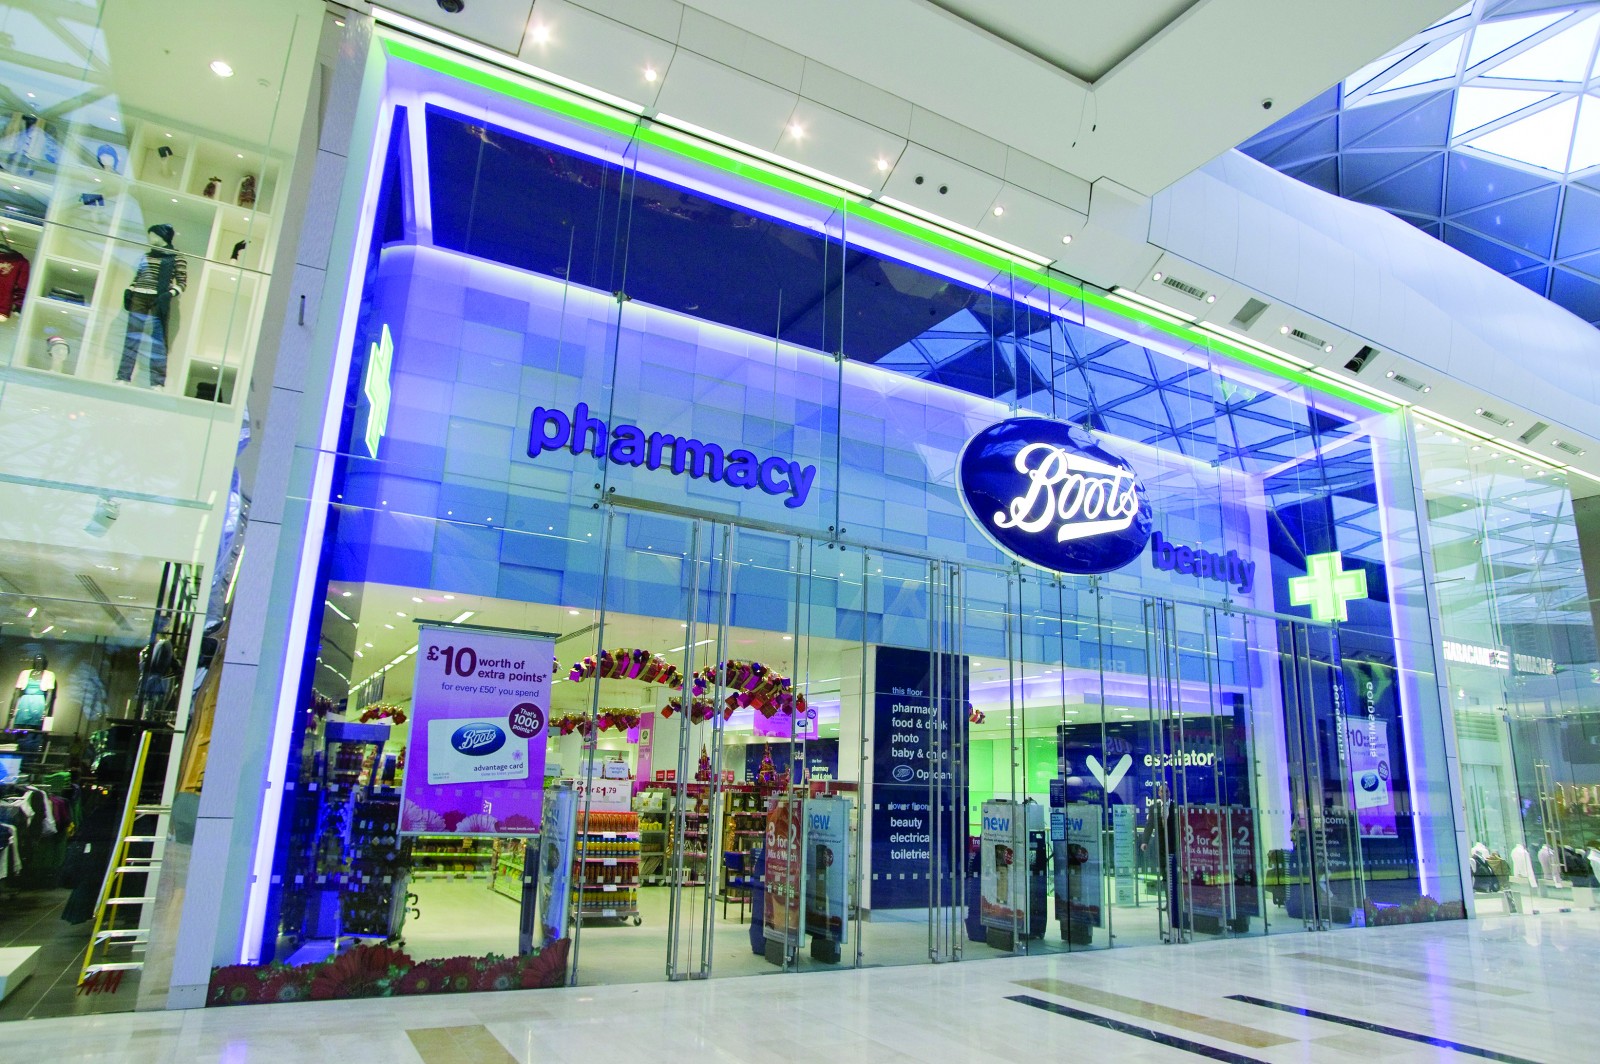 boots-prominent-uk-pharmacy